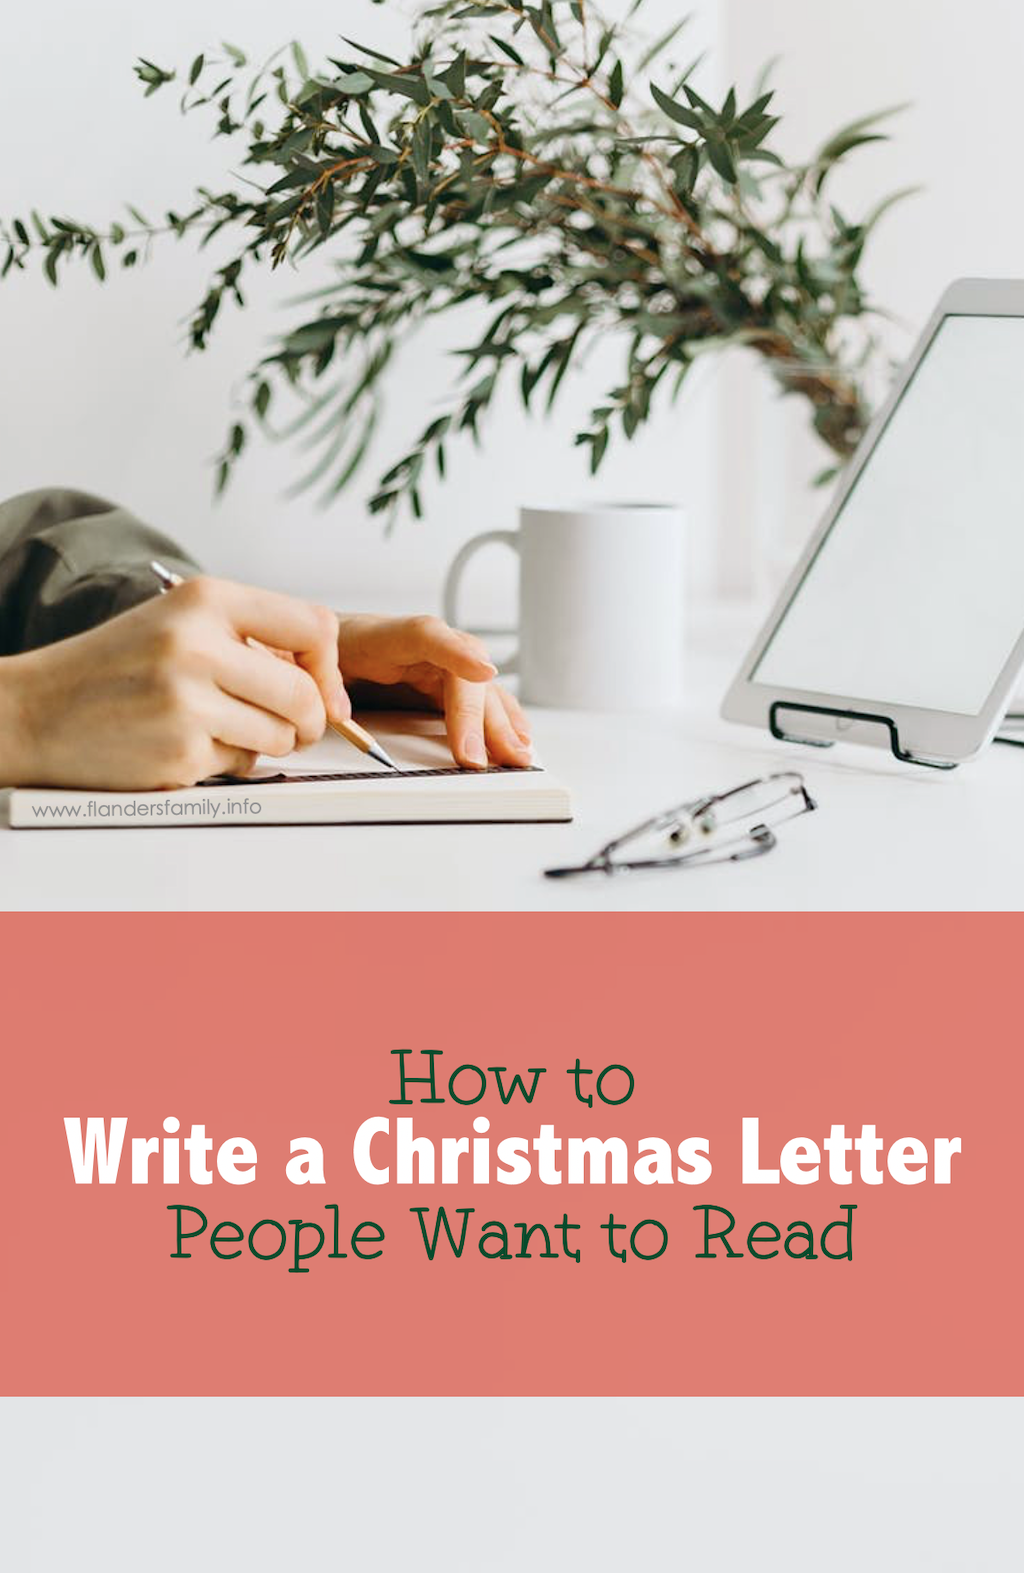 How to Write a Christmas Letter People Want to Read